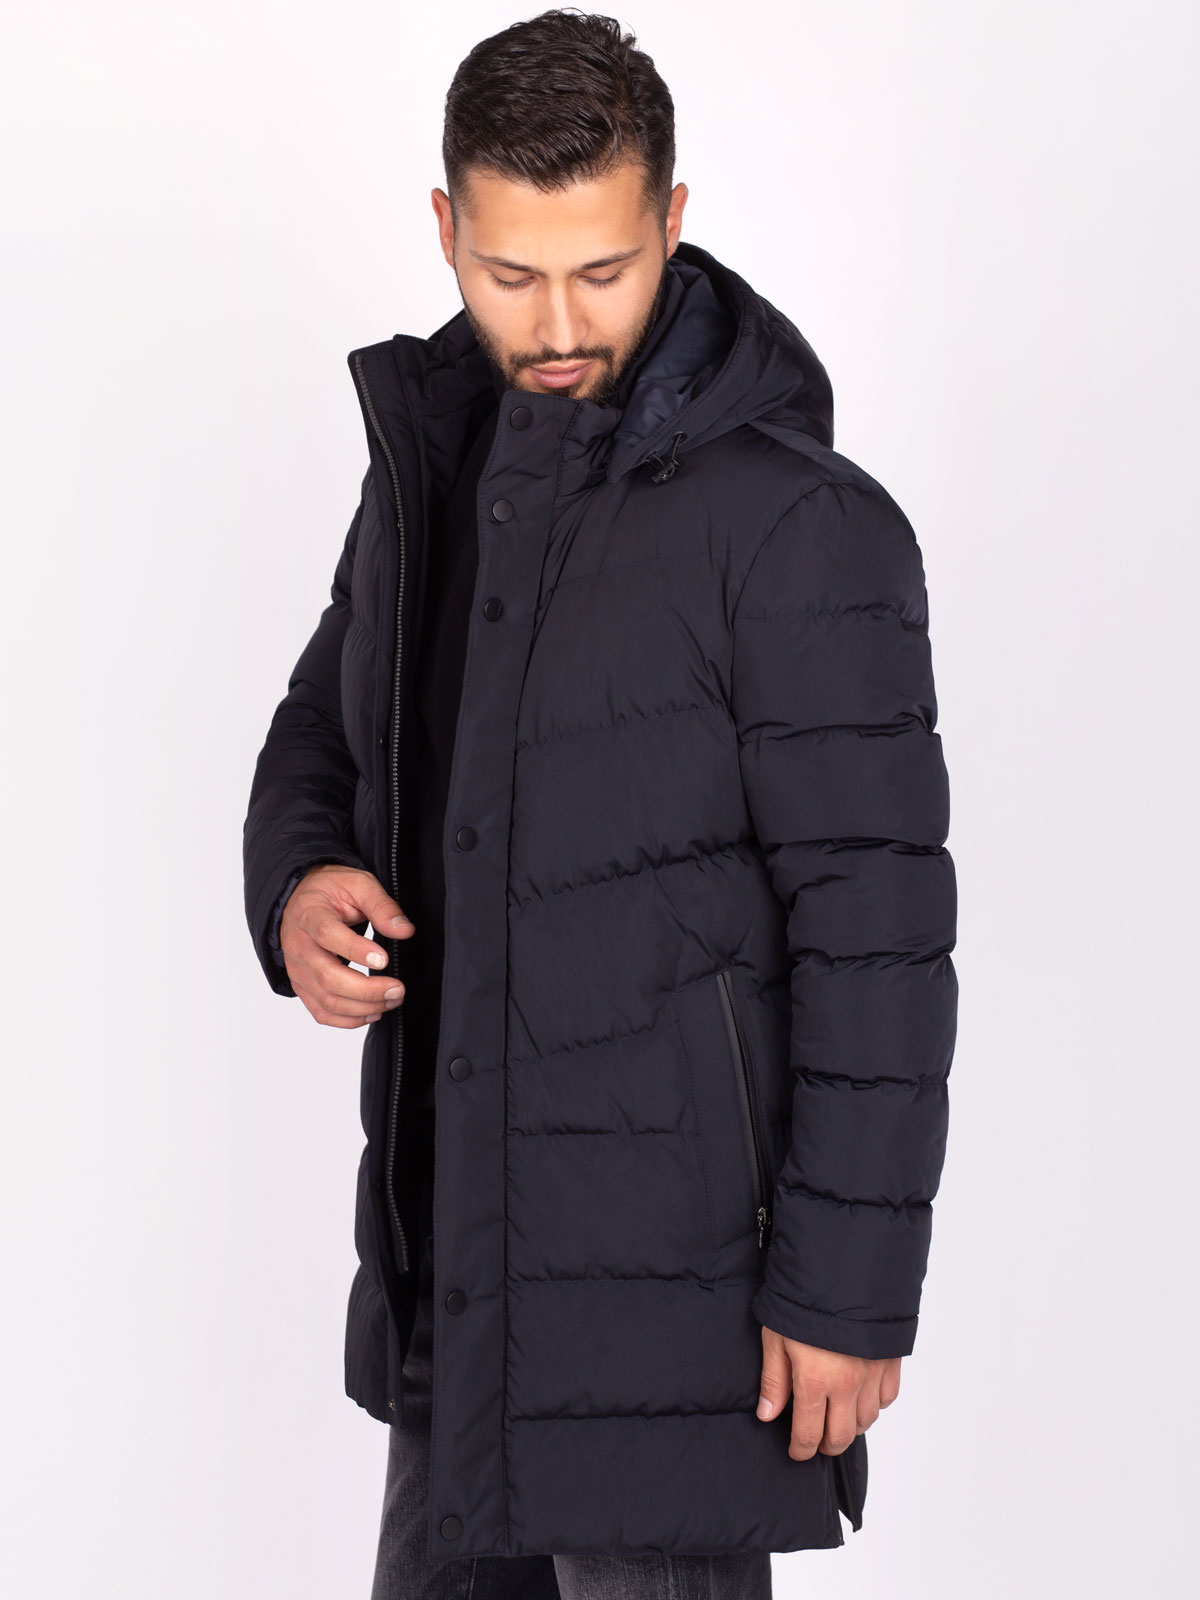 Navy blue long jacket with hood - 65119 € 171.54 img3